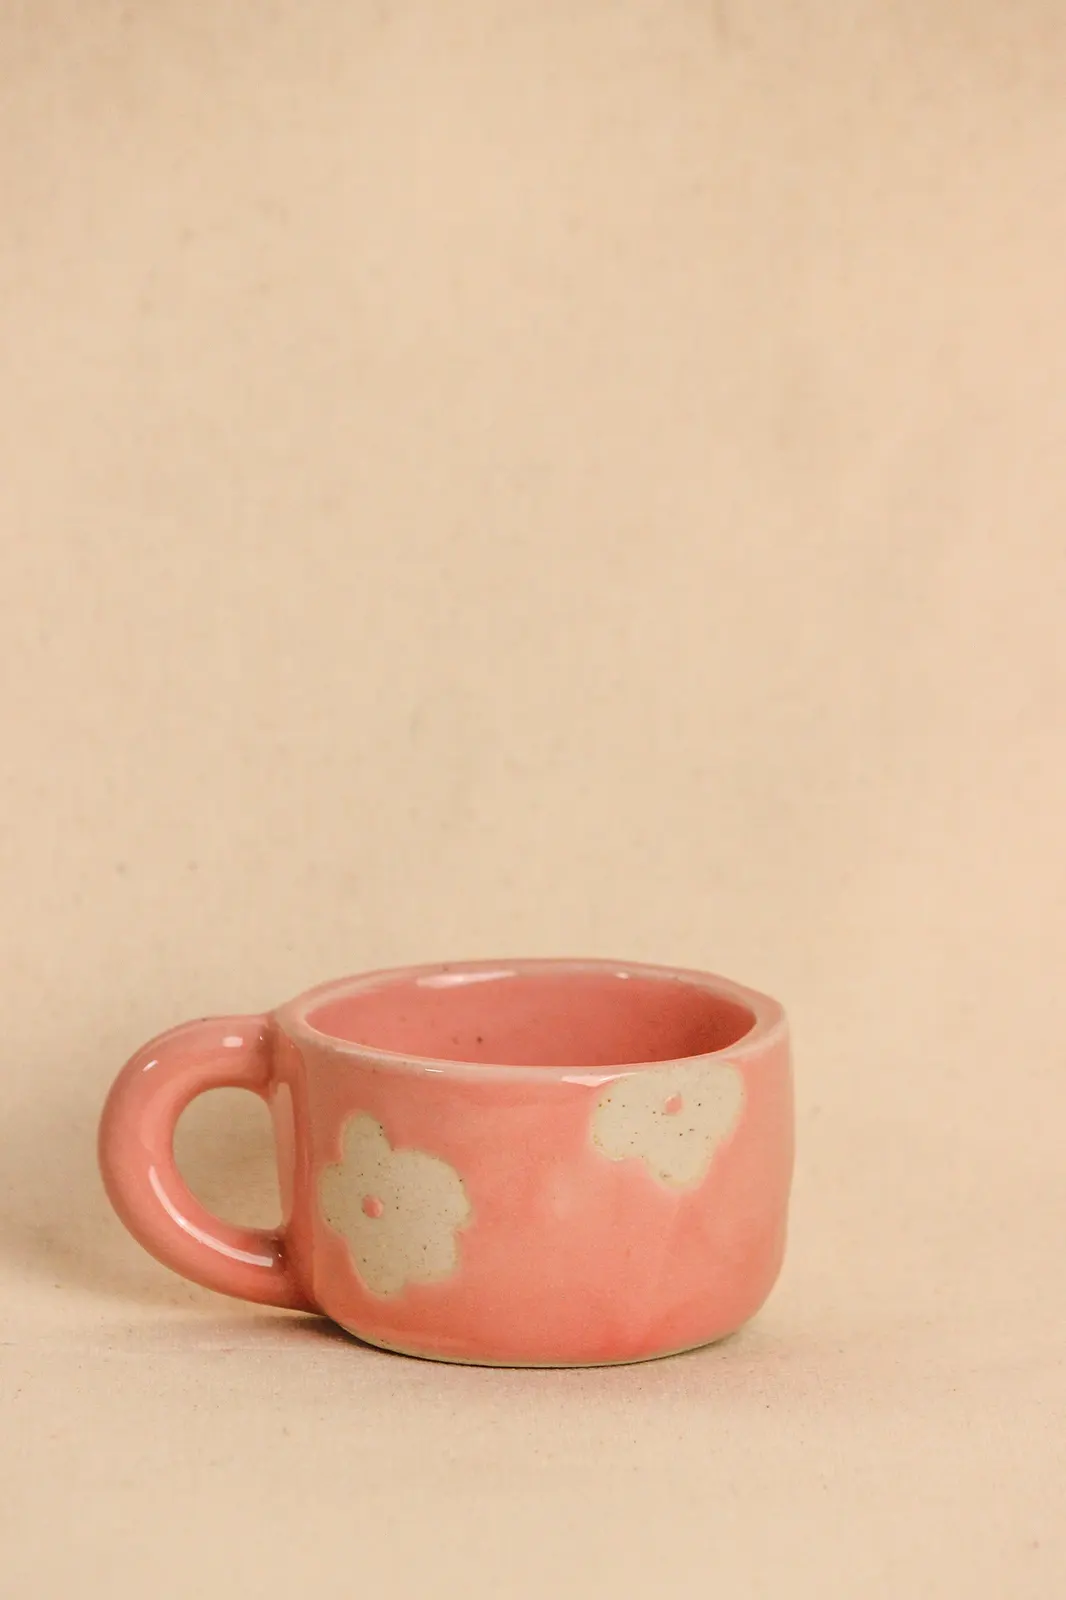 Pretty in pink ceramic coffee tea milk cup, pink cup, ceramic cup, tea cup, ceramic tea cup, coffee cup, eco friendly coffee cup, hand painted cup, ceramic mugs, coffee mug, eco friendly mugs, hand painted mug, handmade mug, coffee mug ceramic, Toh, Sepia Stories, ceramic mug handmade, pink coffee cup, ceramic cups online